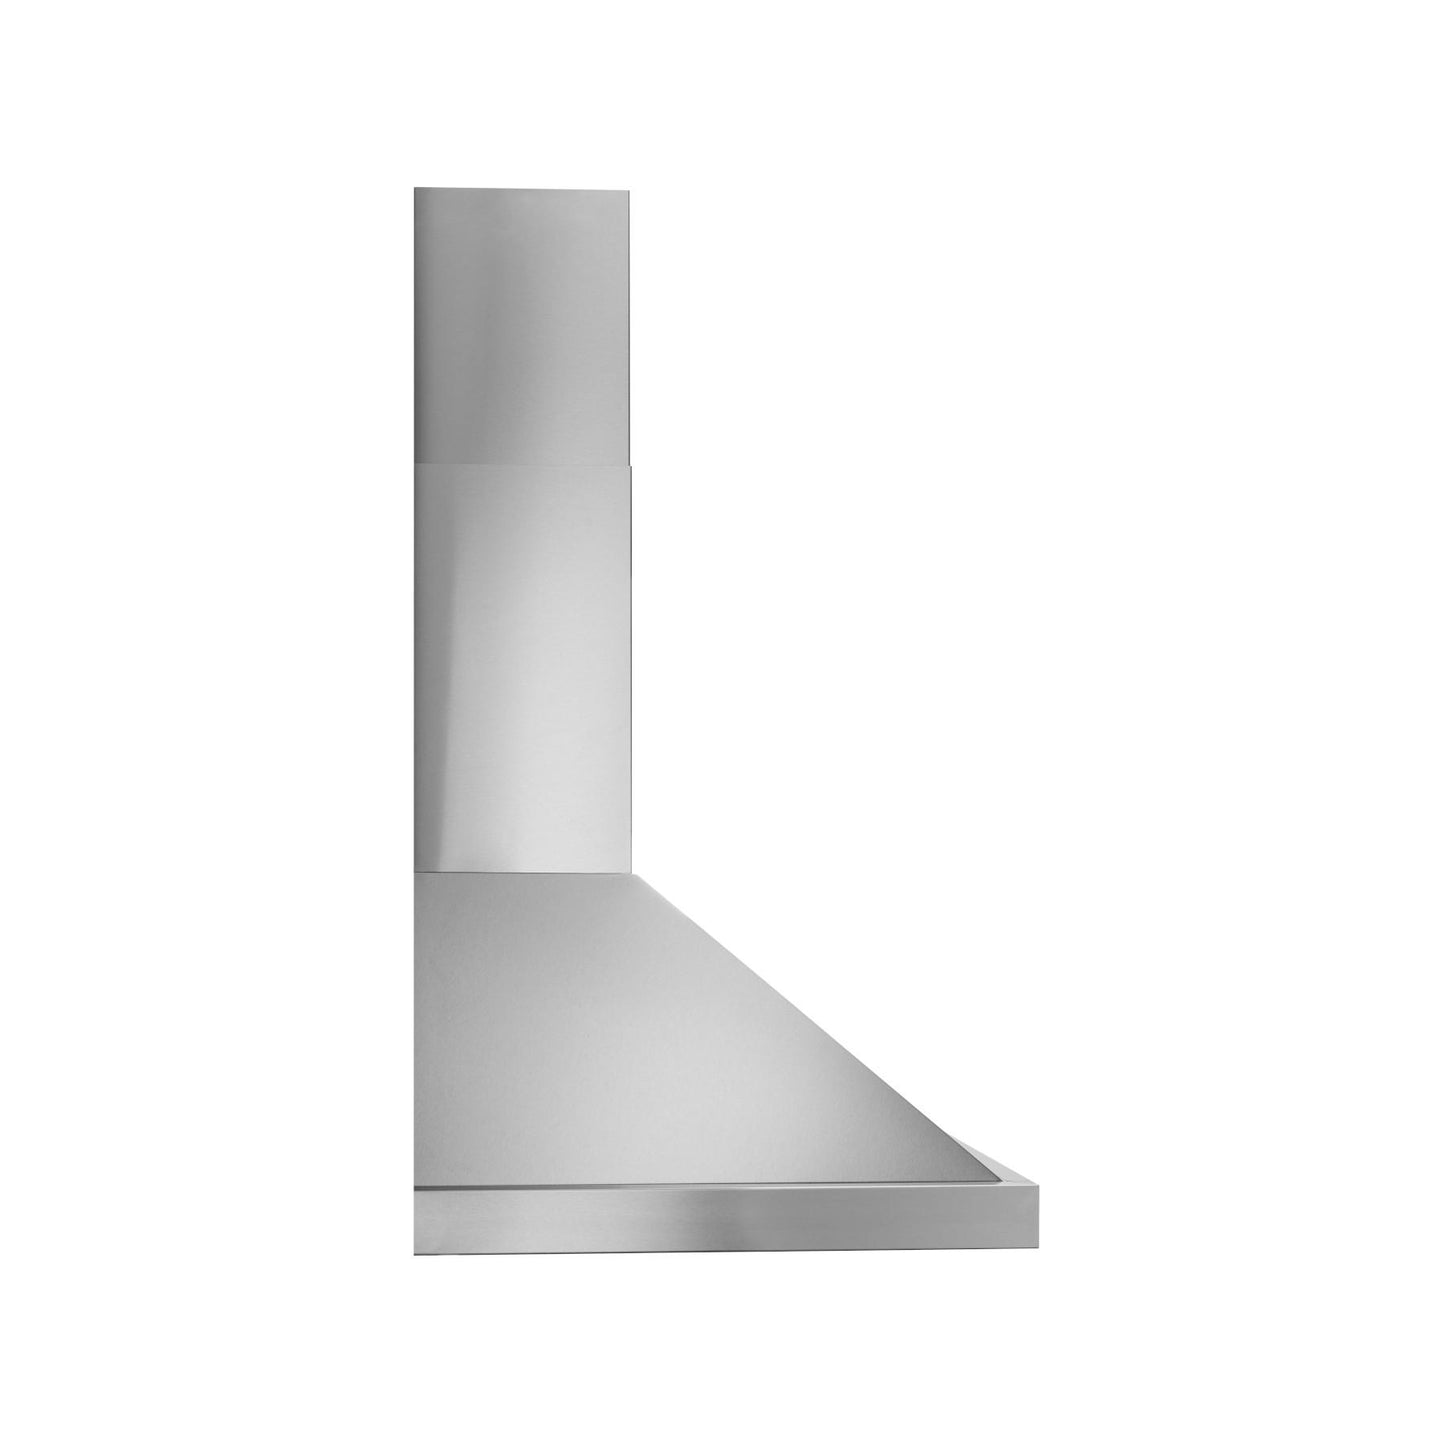 Best Range Hoods WCP1306SS 30-Inch Wall Mount Chimney Hood W/ Smartsense® And Voice Control, 650 Max Blower Cfm, Stainless Steel (Wcp1 Series)